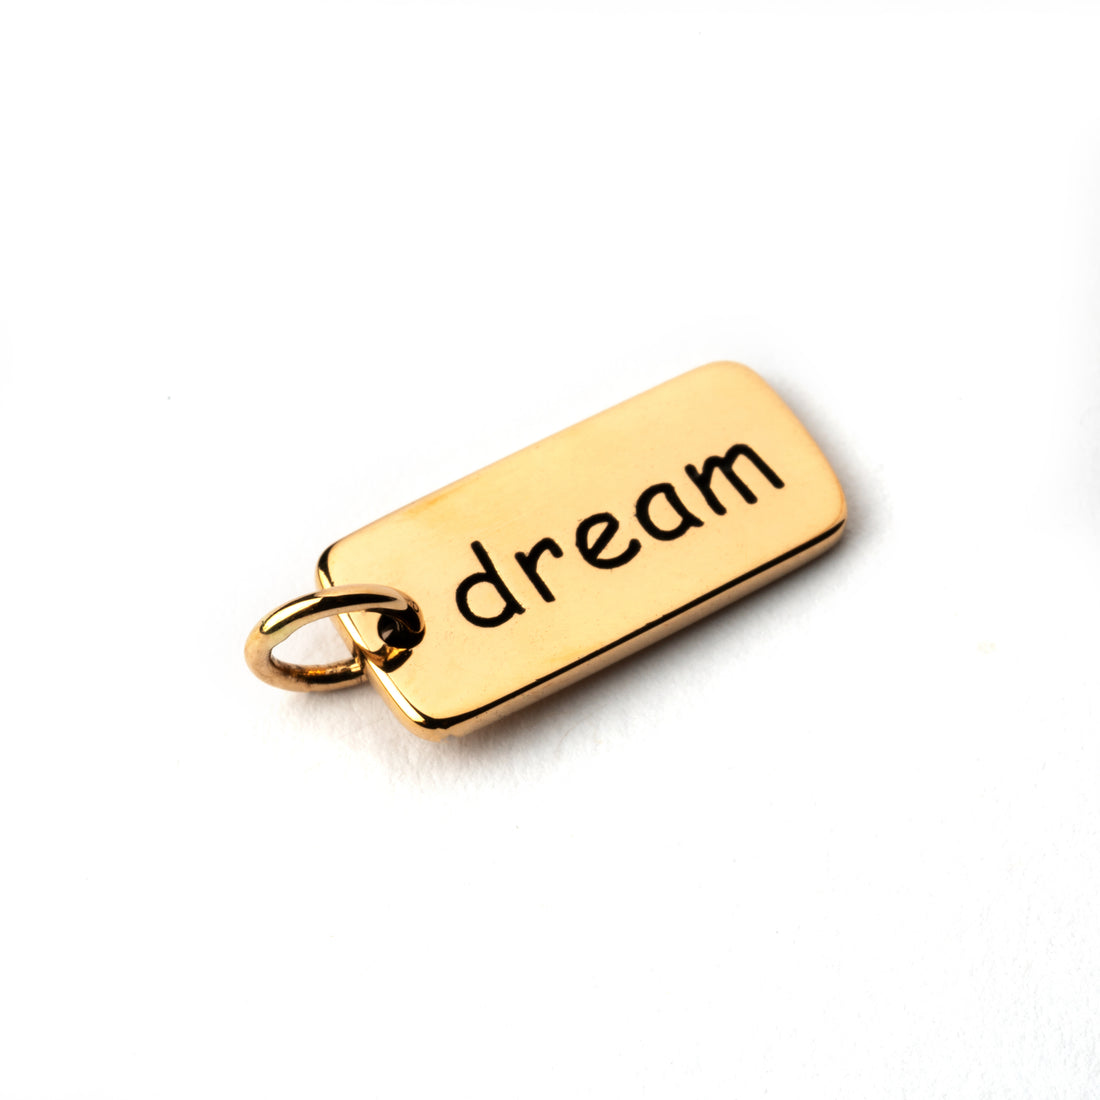 Dream Charm Necklace frontal view